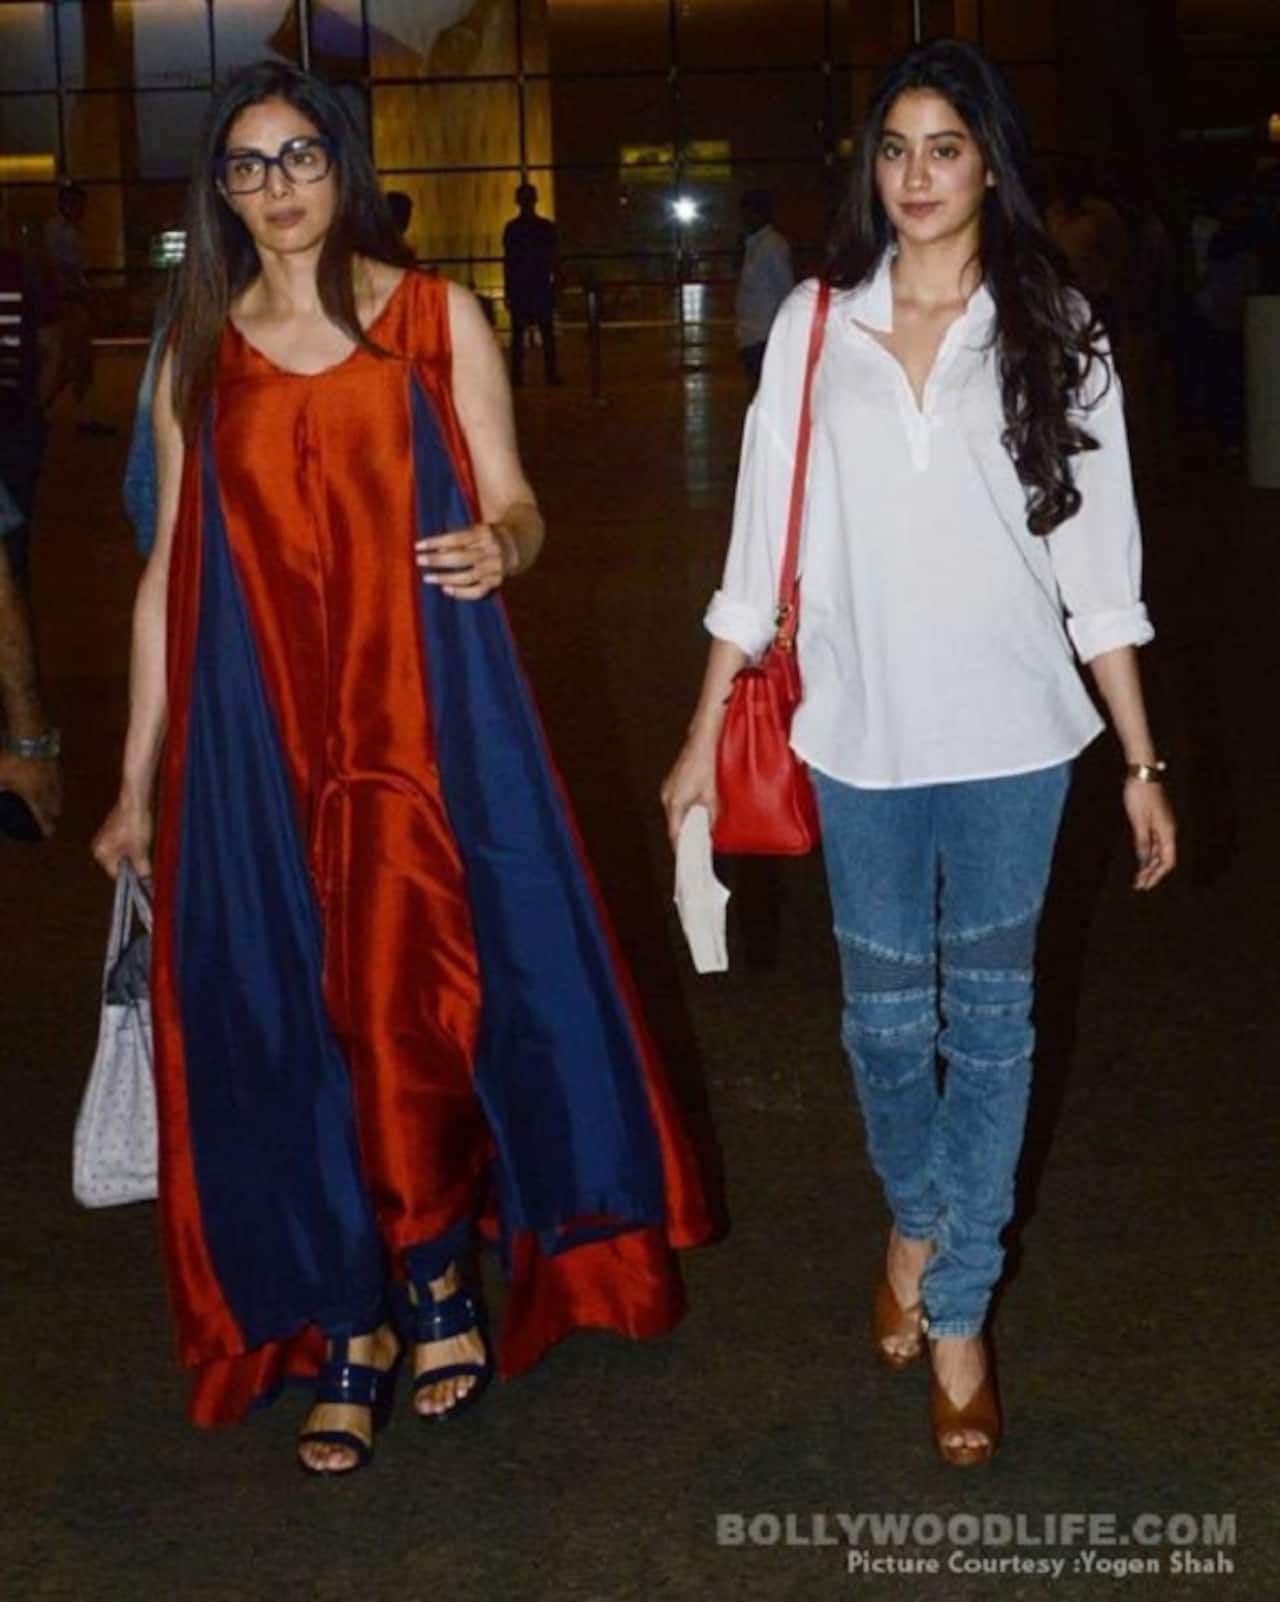 Doesn't Jhanvi Kapoor look a lot like mother Sridevi in this airport spotting? - view HQ pics